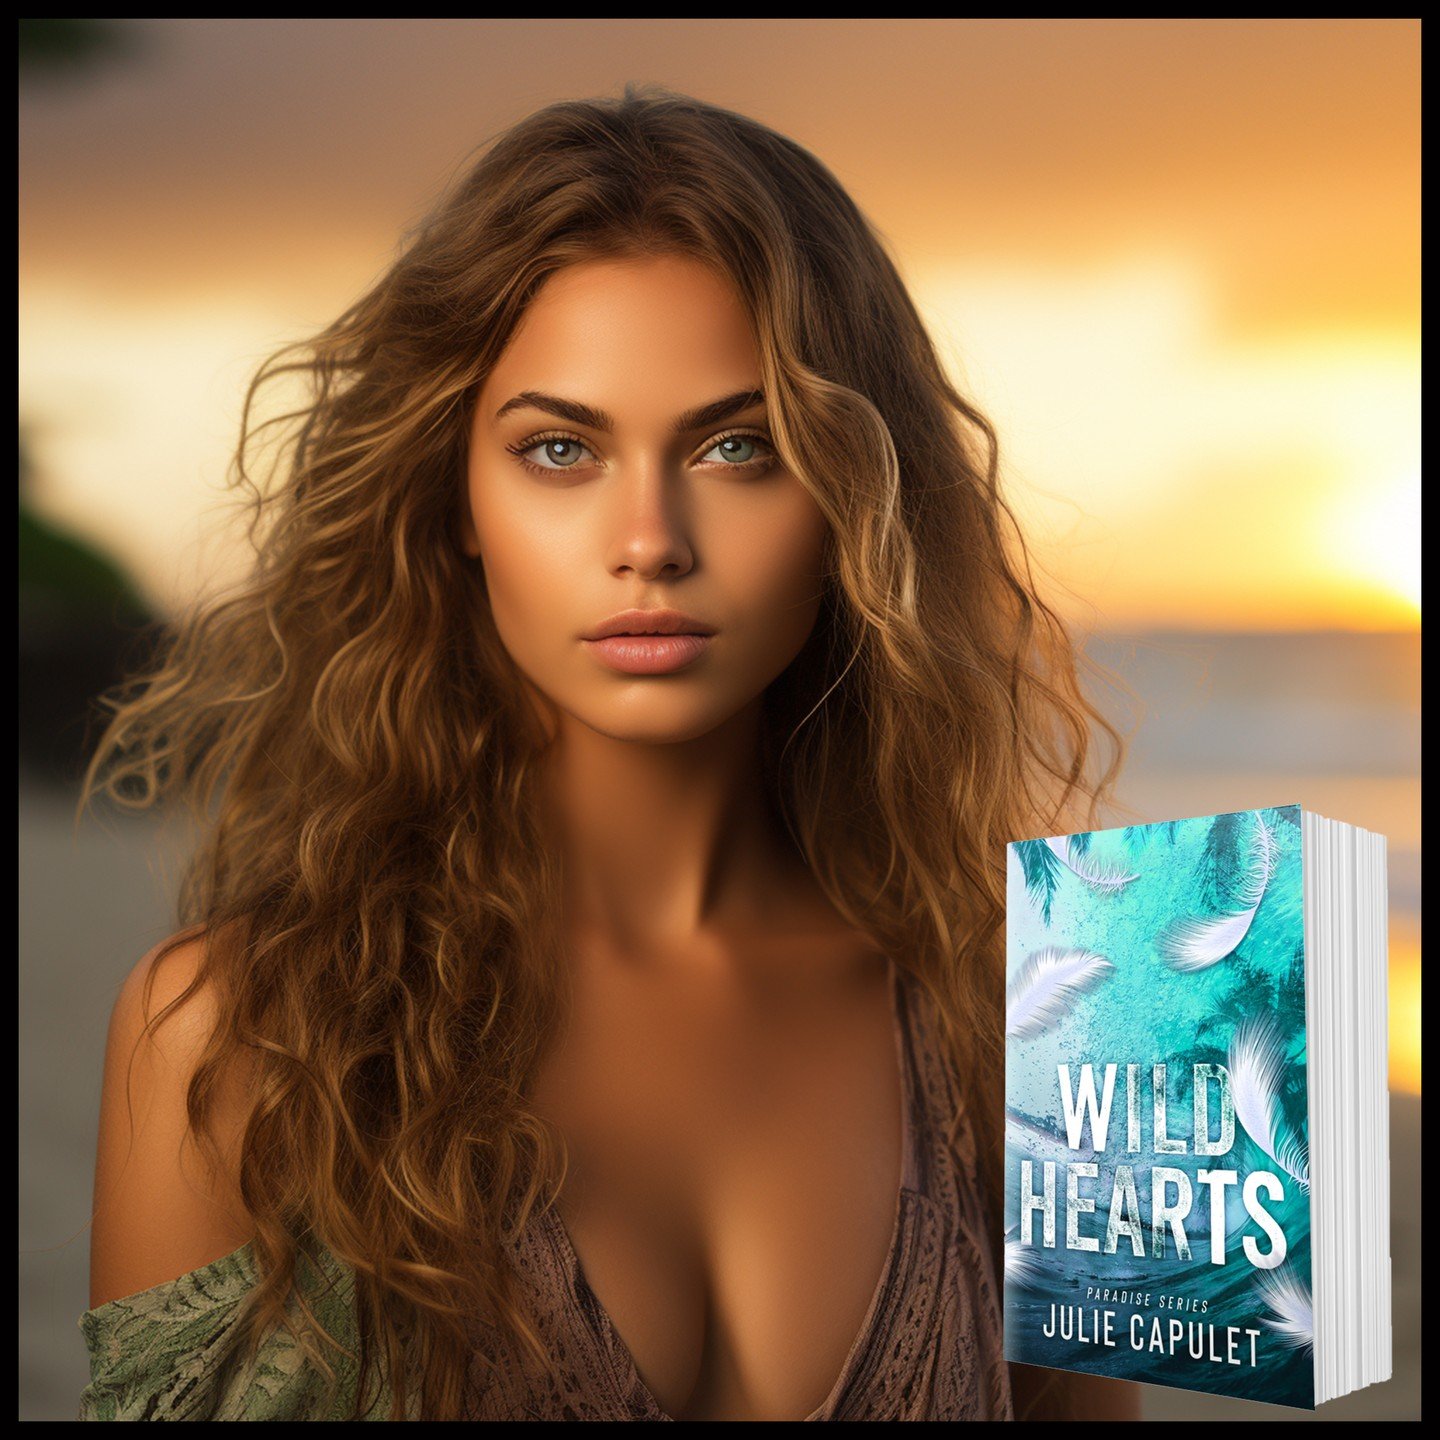 Vivi ✨

💙 Wild Hearts: https://amzn.to/3VZuRk0

The first time I saw Wolf Ramsey was at his family&rsquo;s estate in Kauai. He was huge and imposing. Armed to the teeth. When he looked right at me, fascination wasn&rsquo;t my first reaction. It was 